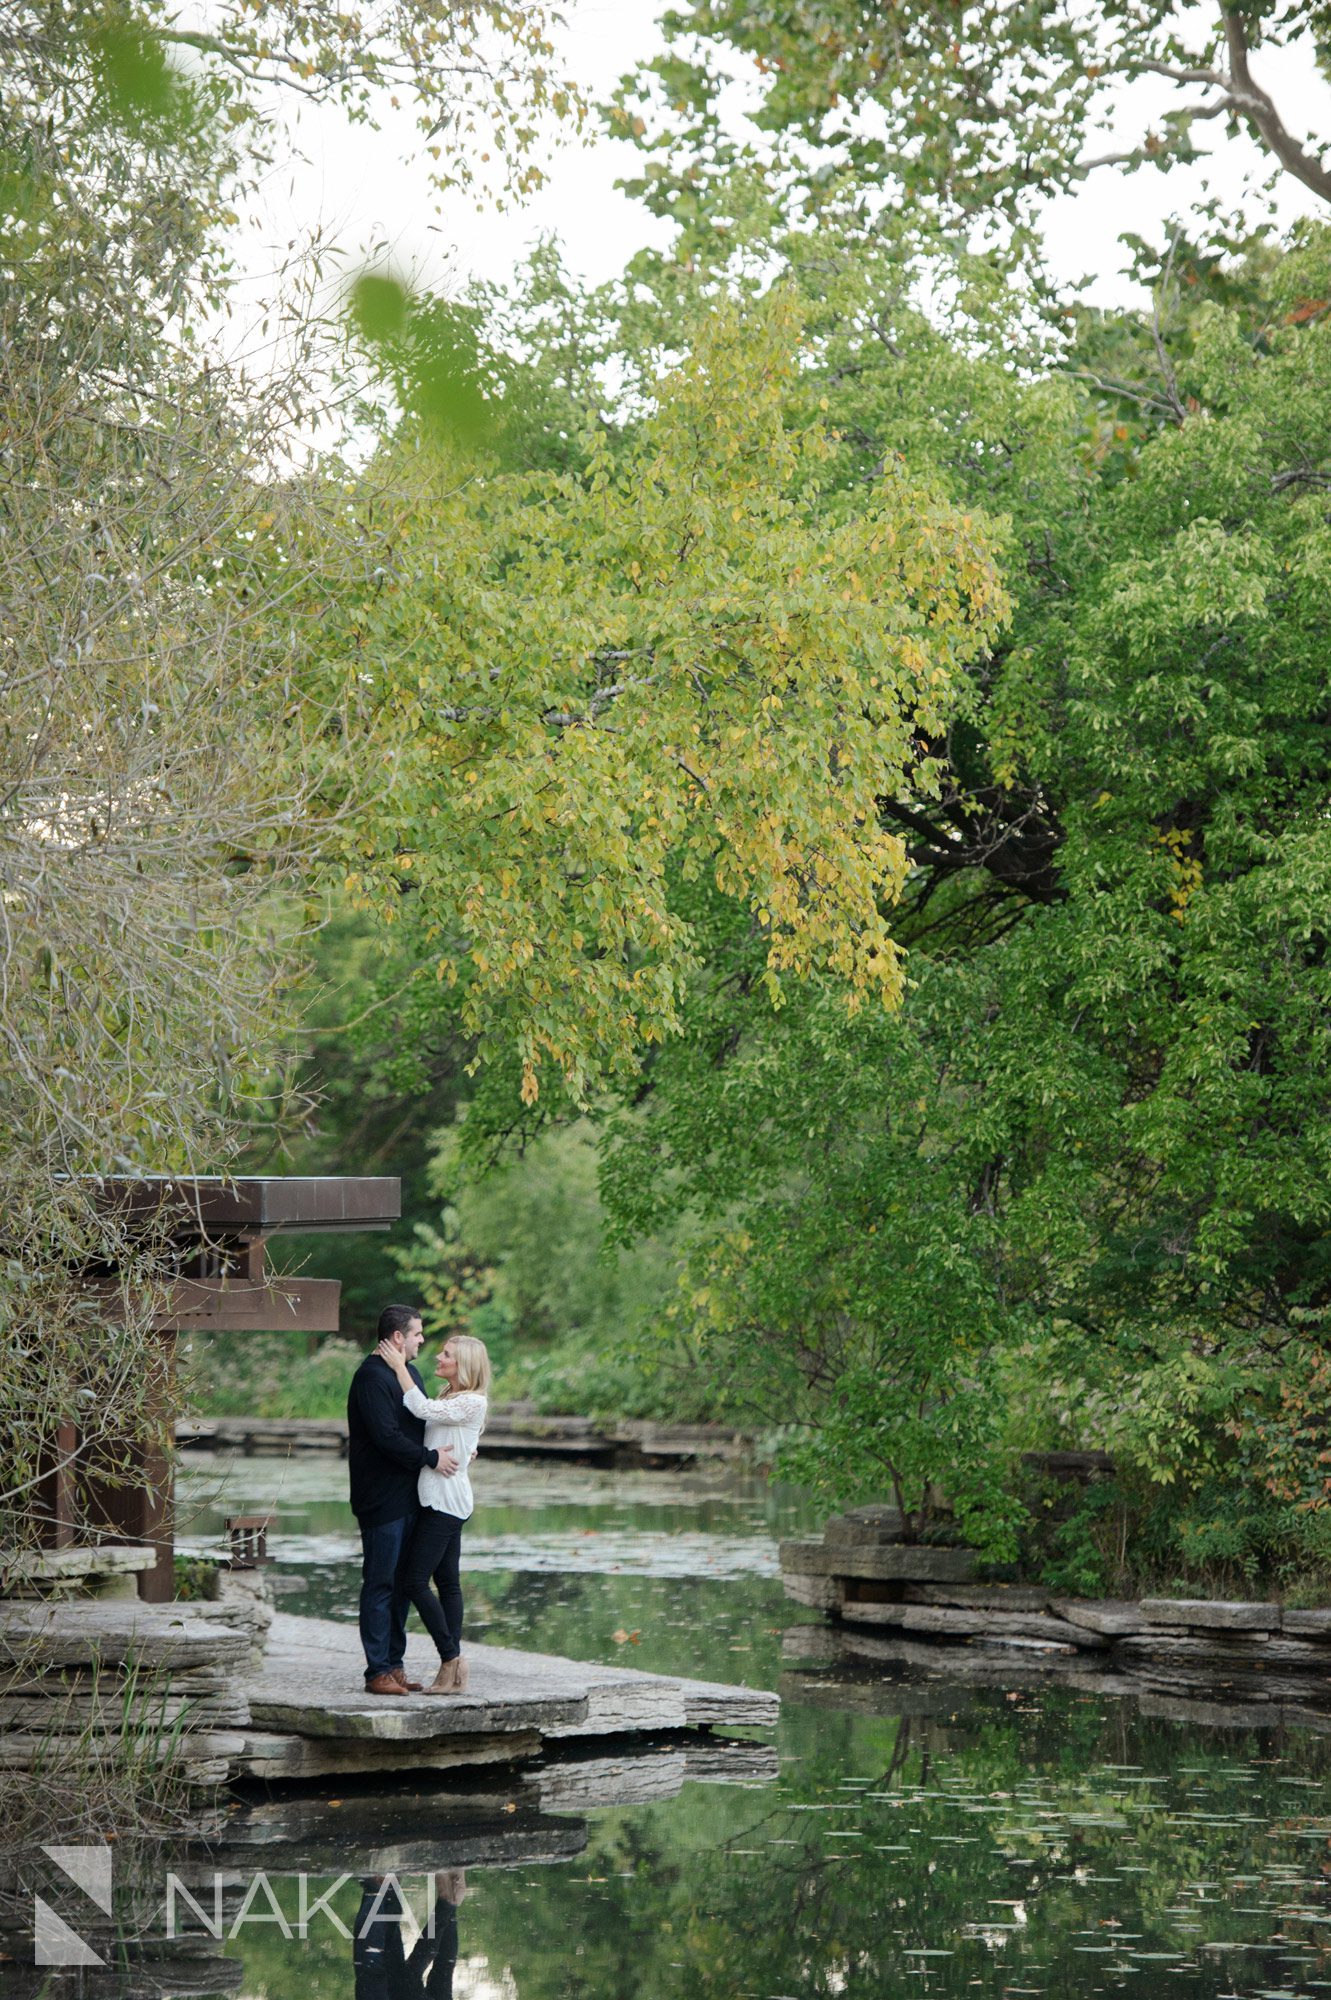 lily pond top chicago engagement photo location